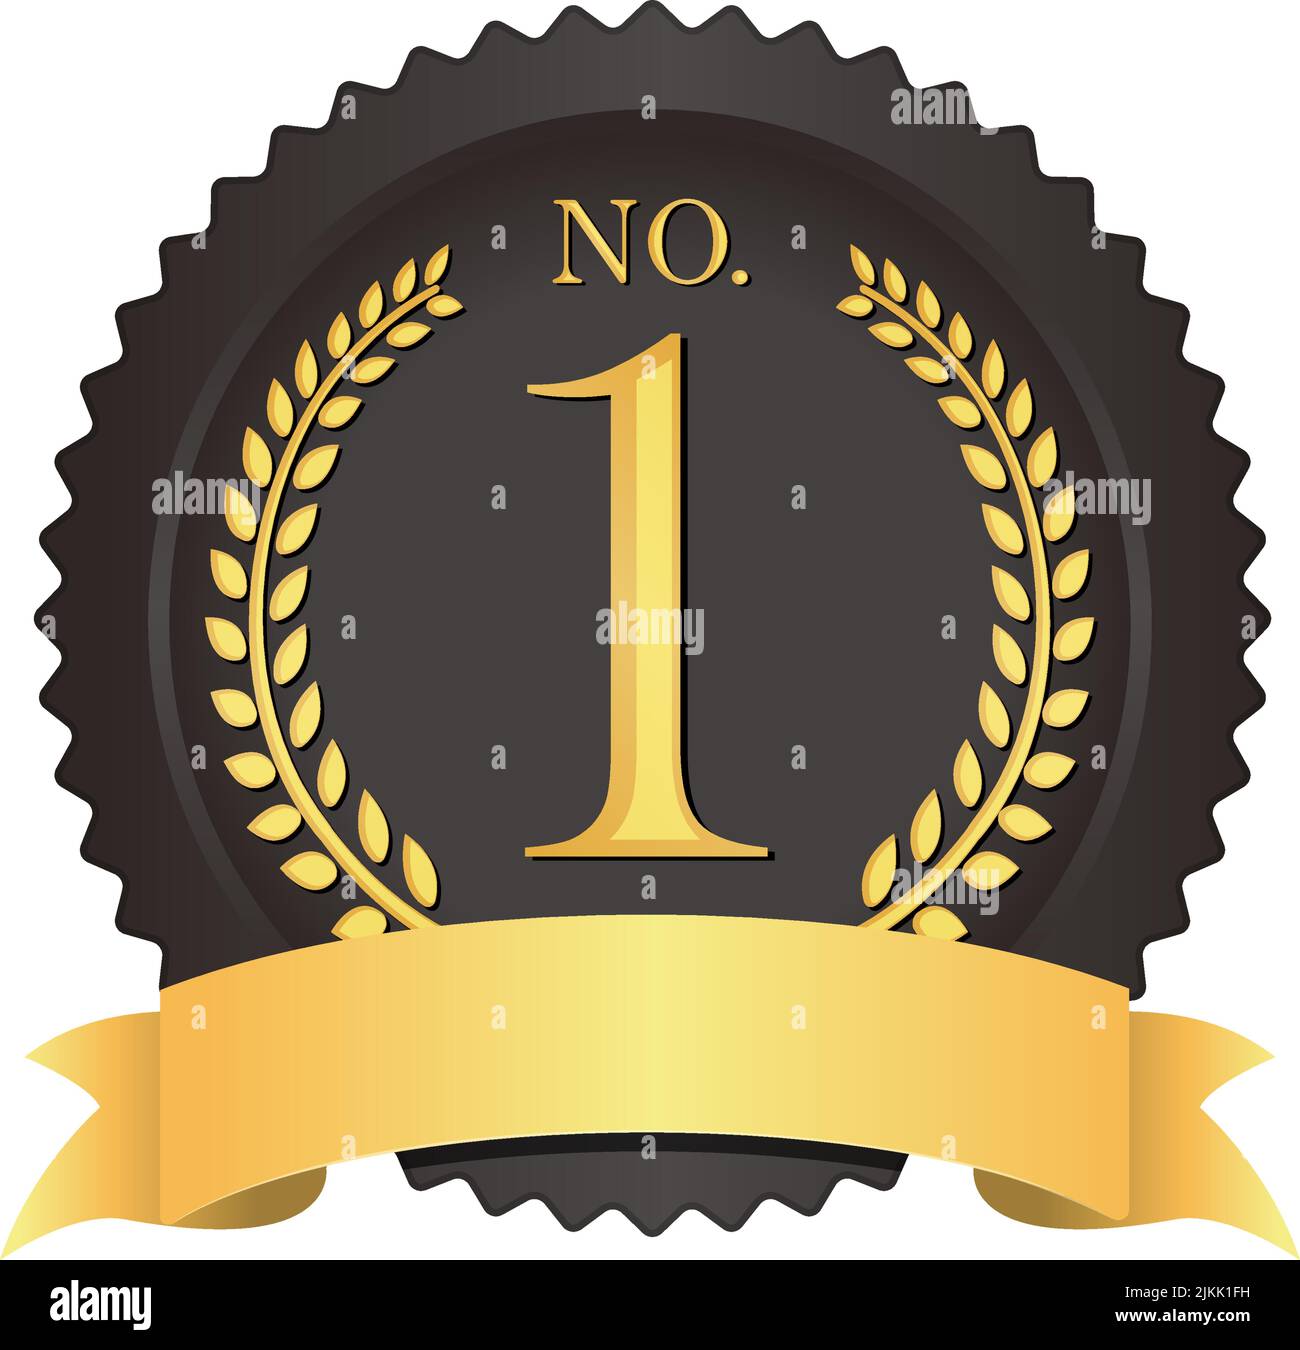 No.1 medal icon illustration ( with text space ) Stock Vector